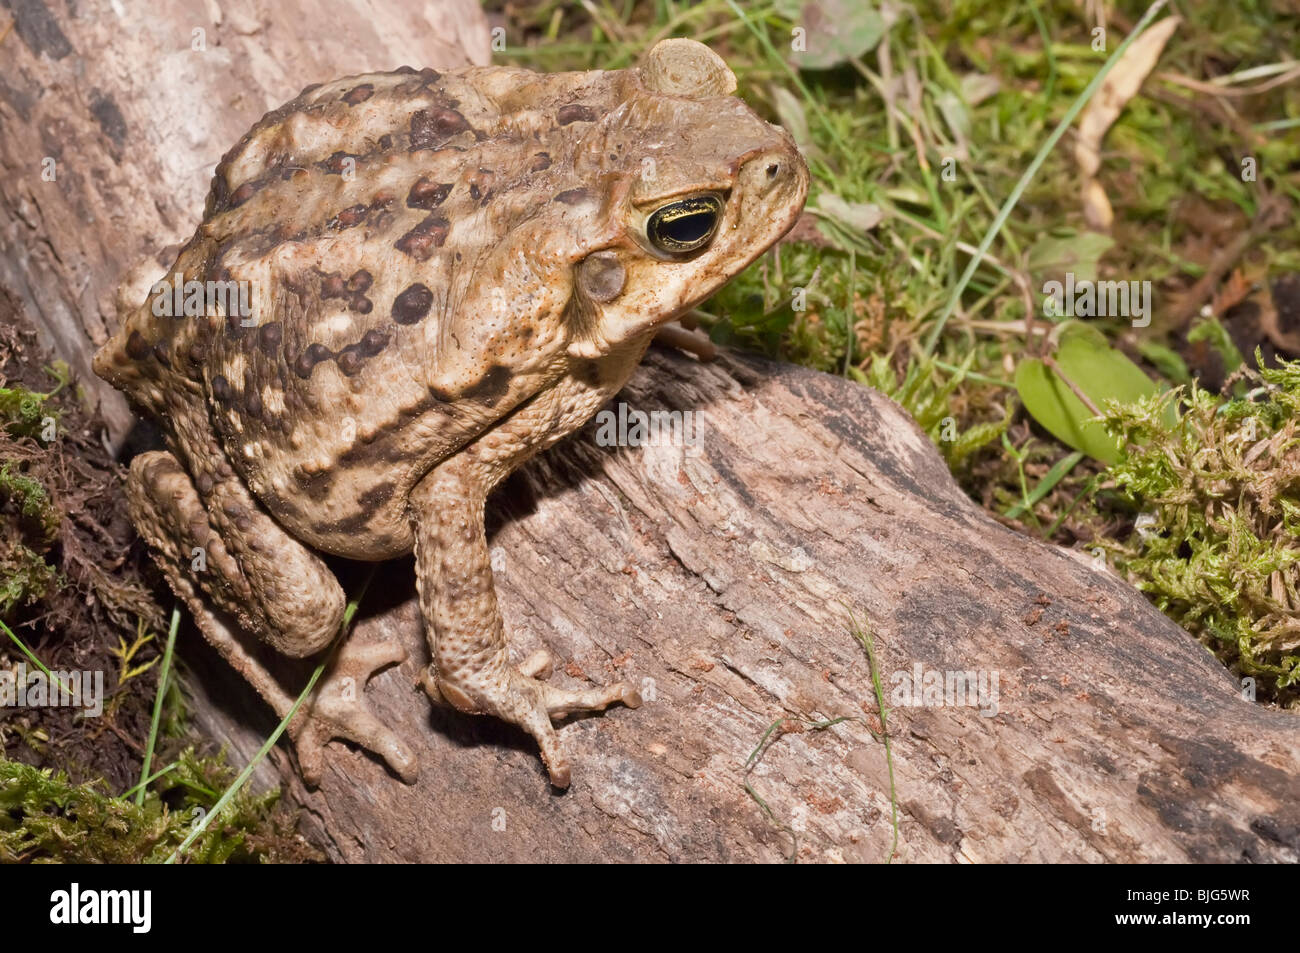 Cane toad, Bufo marinus, also known as Giant Neotropical toad or marine toad, native to Central and South America Stock Photo